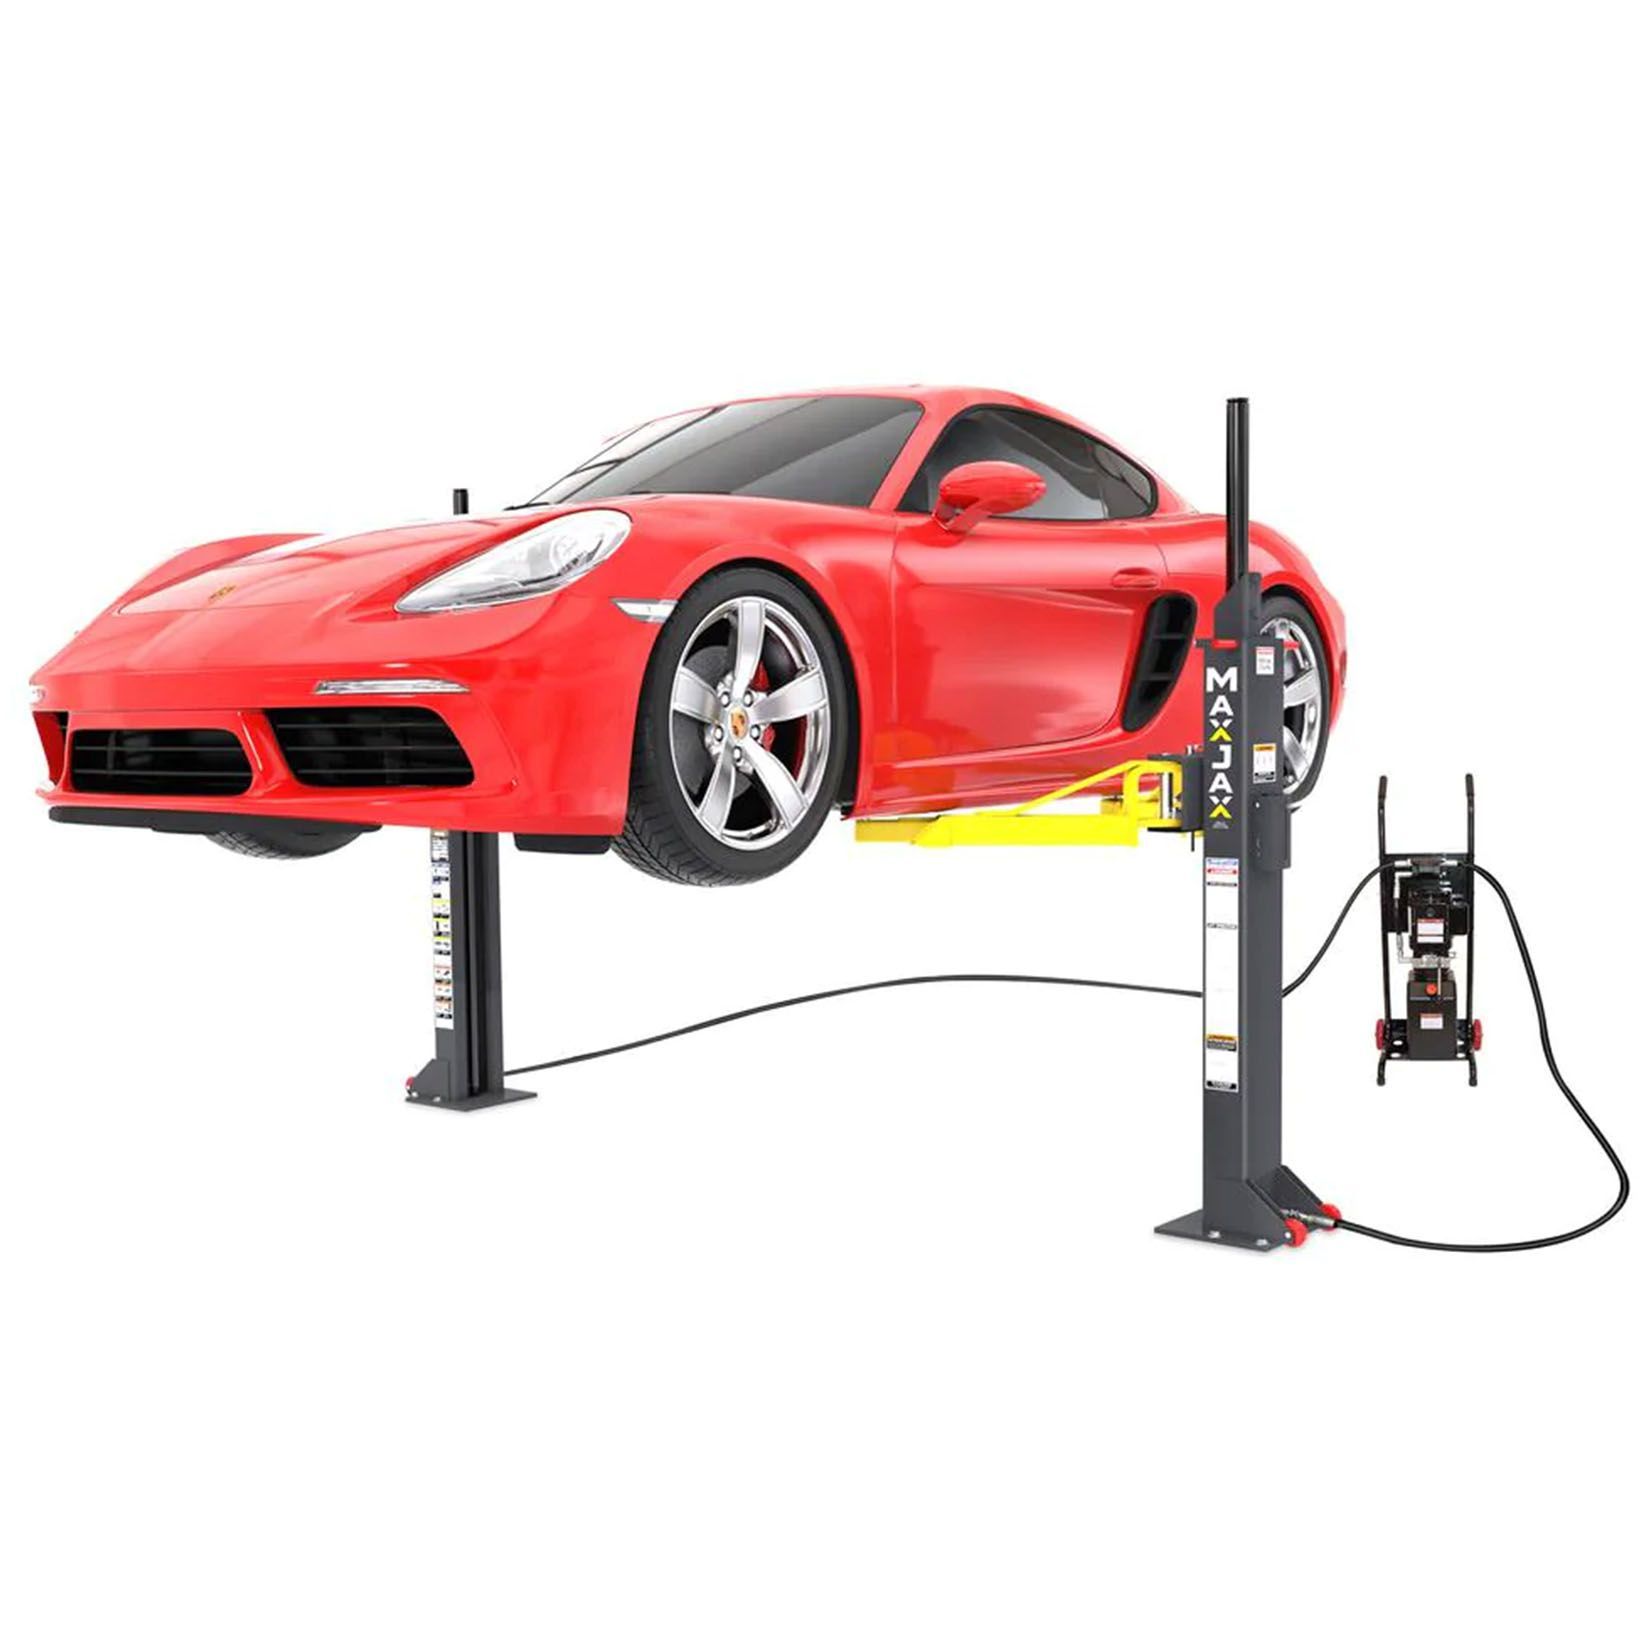 Vehicle Lifts For Your Home Garage, Best Auto Lift For Home Garage